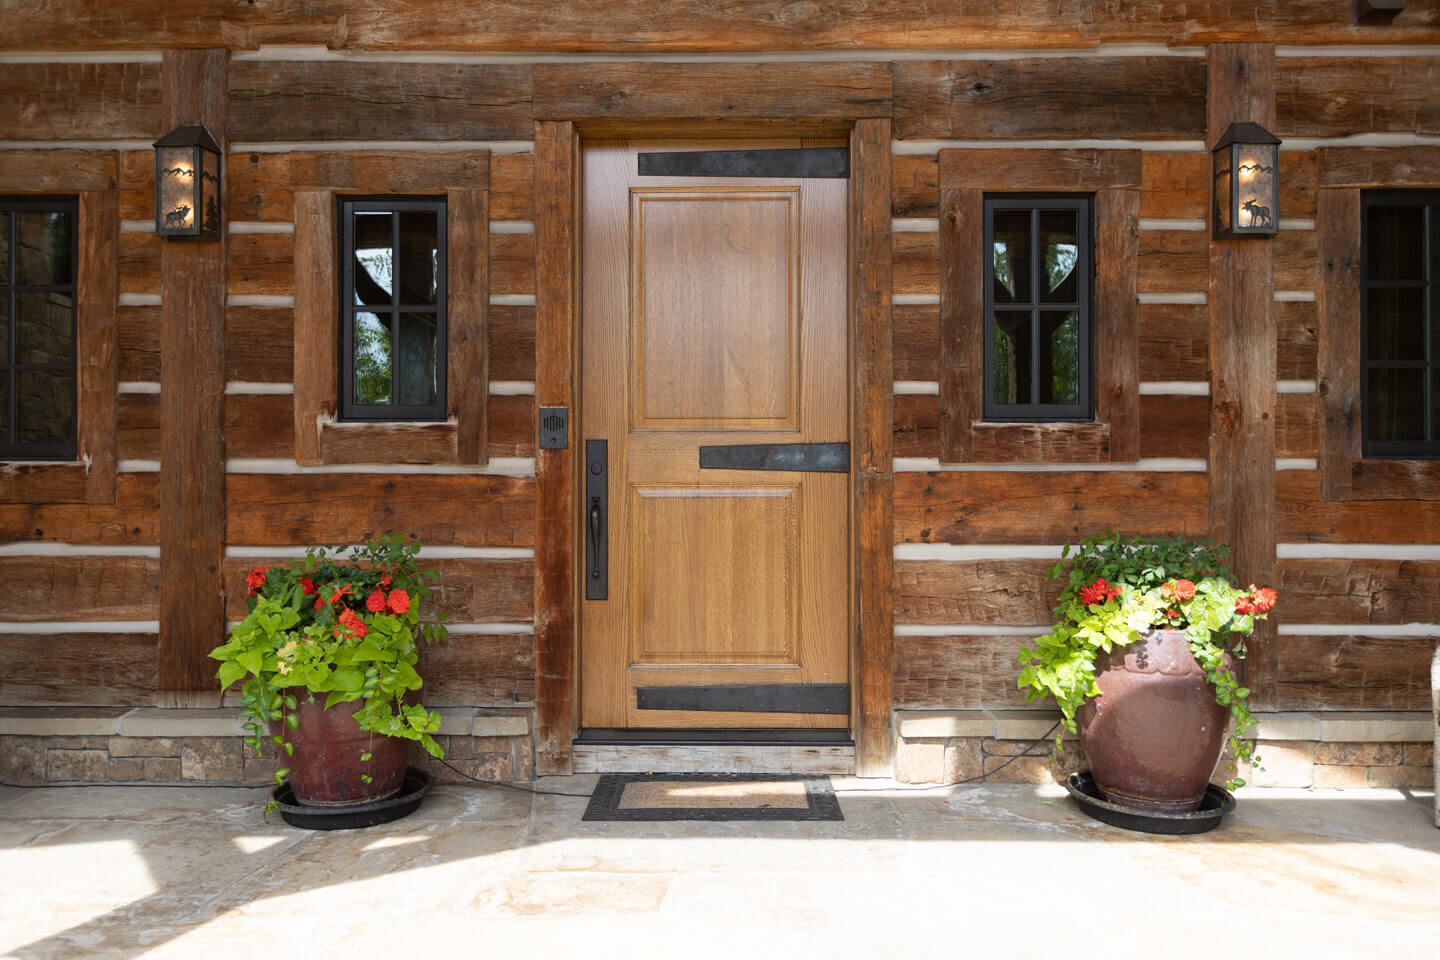 Residence entrance with wood details